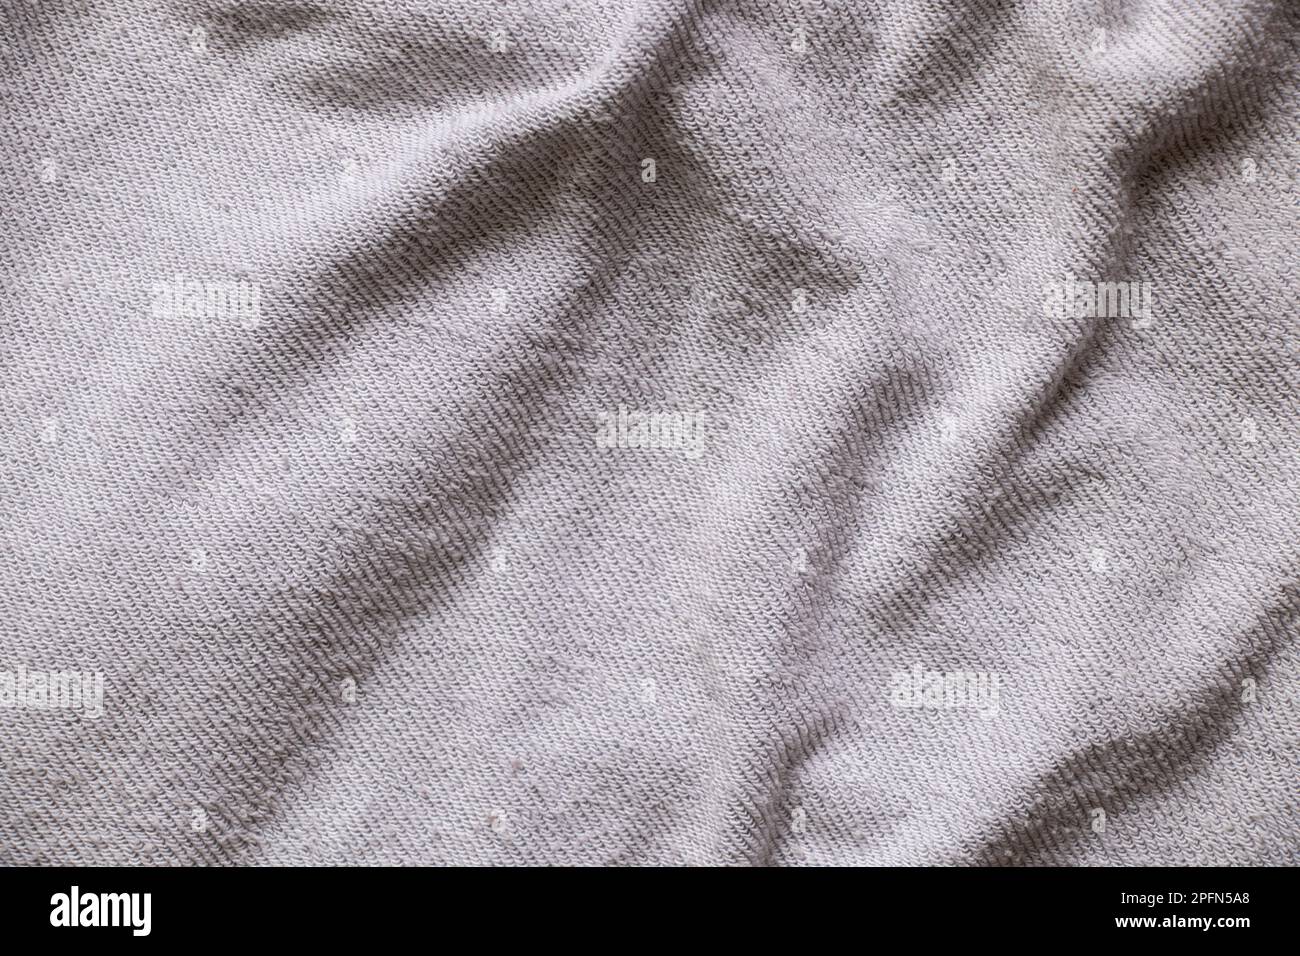 light gray cotton crumpled fabric as background close-up, fabric for background Stock Photo